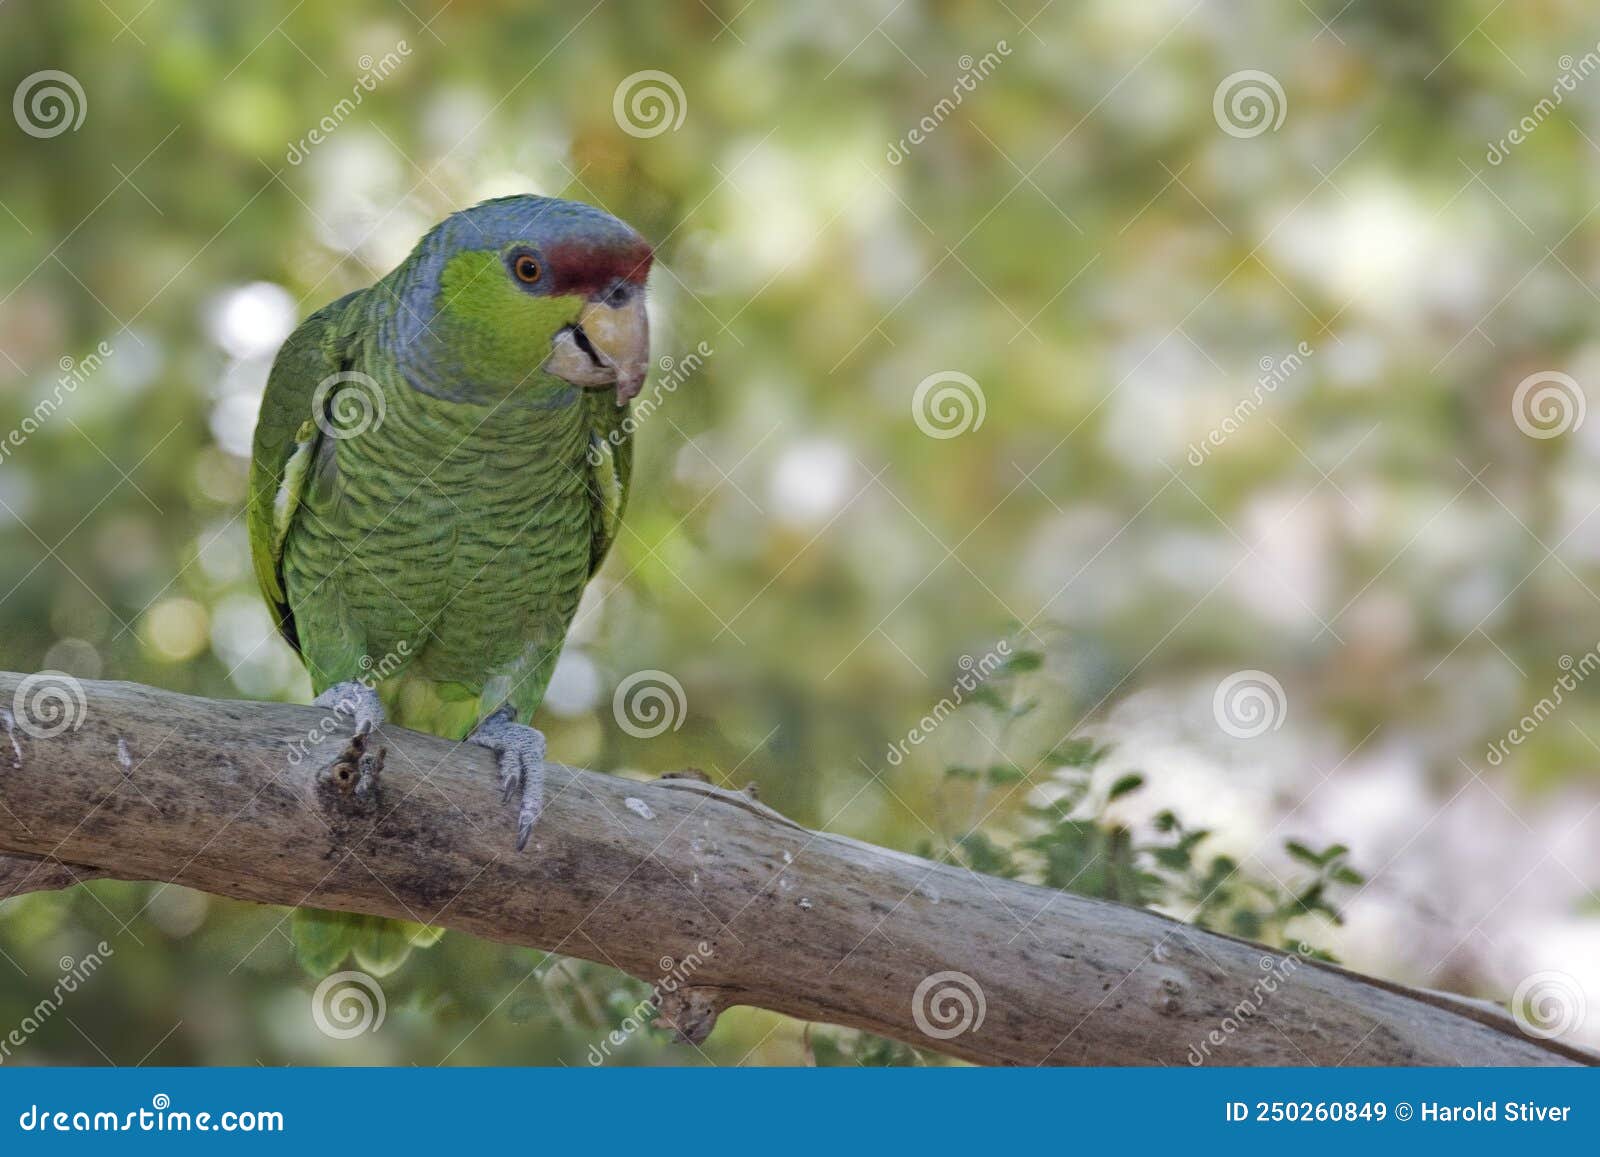 lilac-crowned parrot, amazona finschi, perched